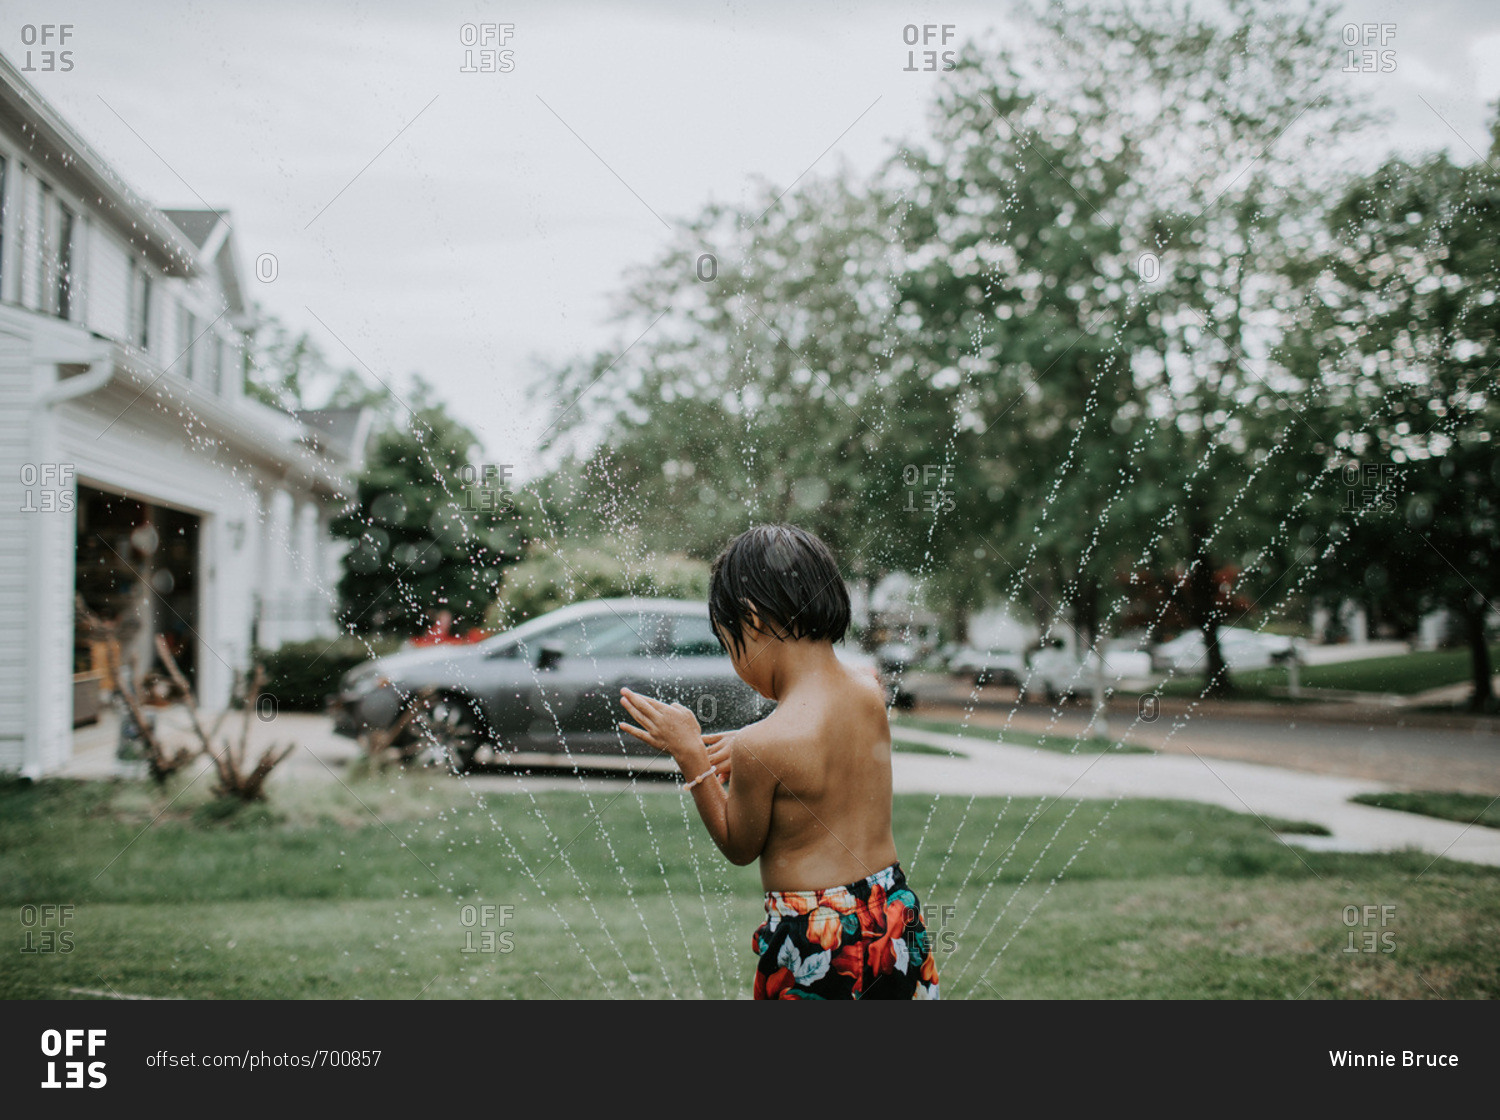 Boy playing in sprinklers in front yard